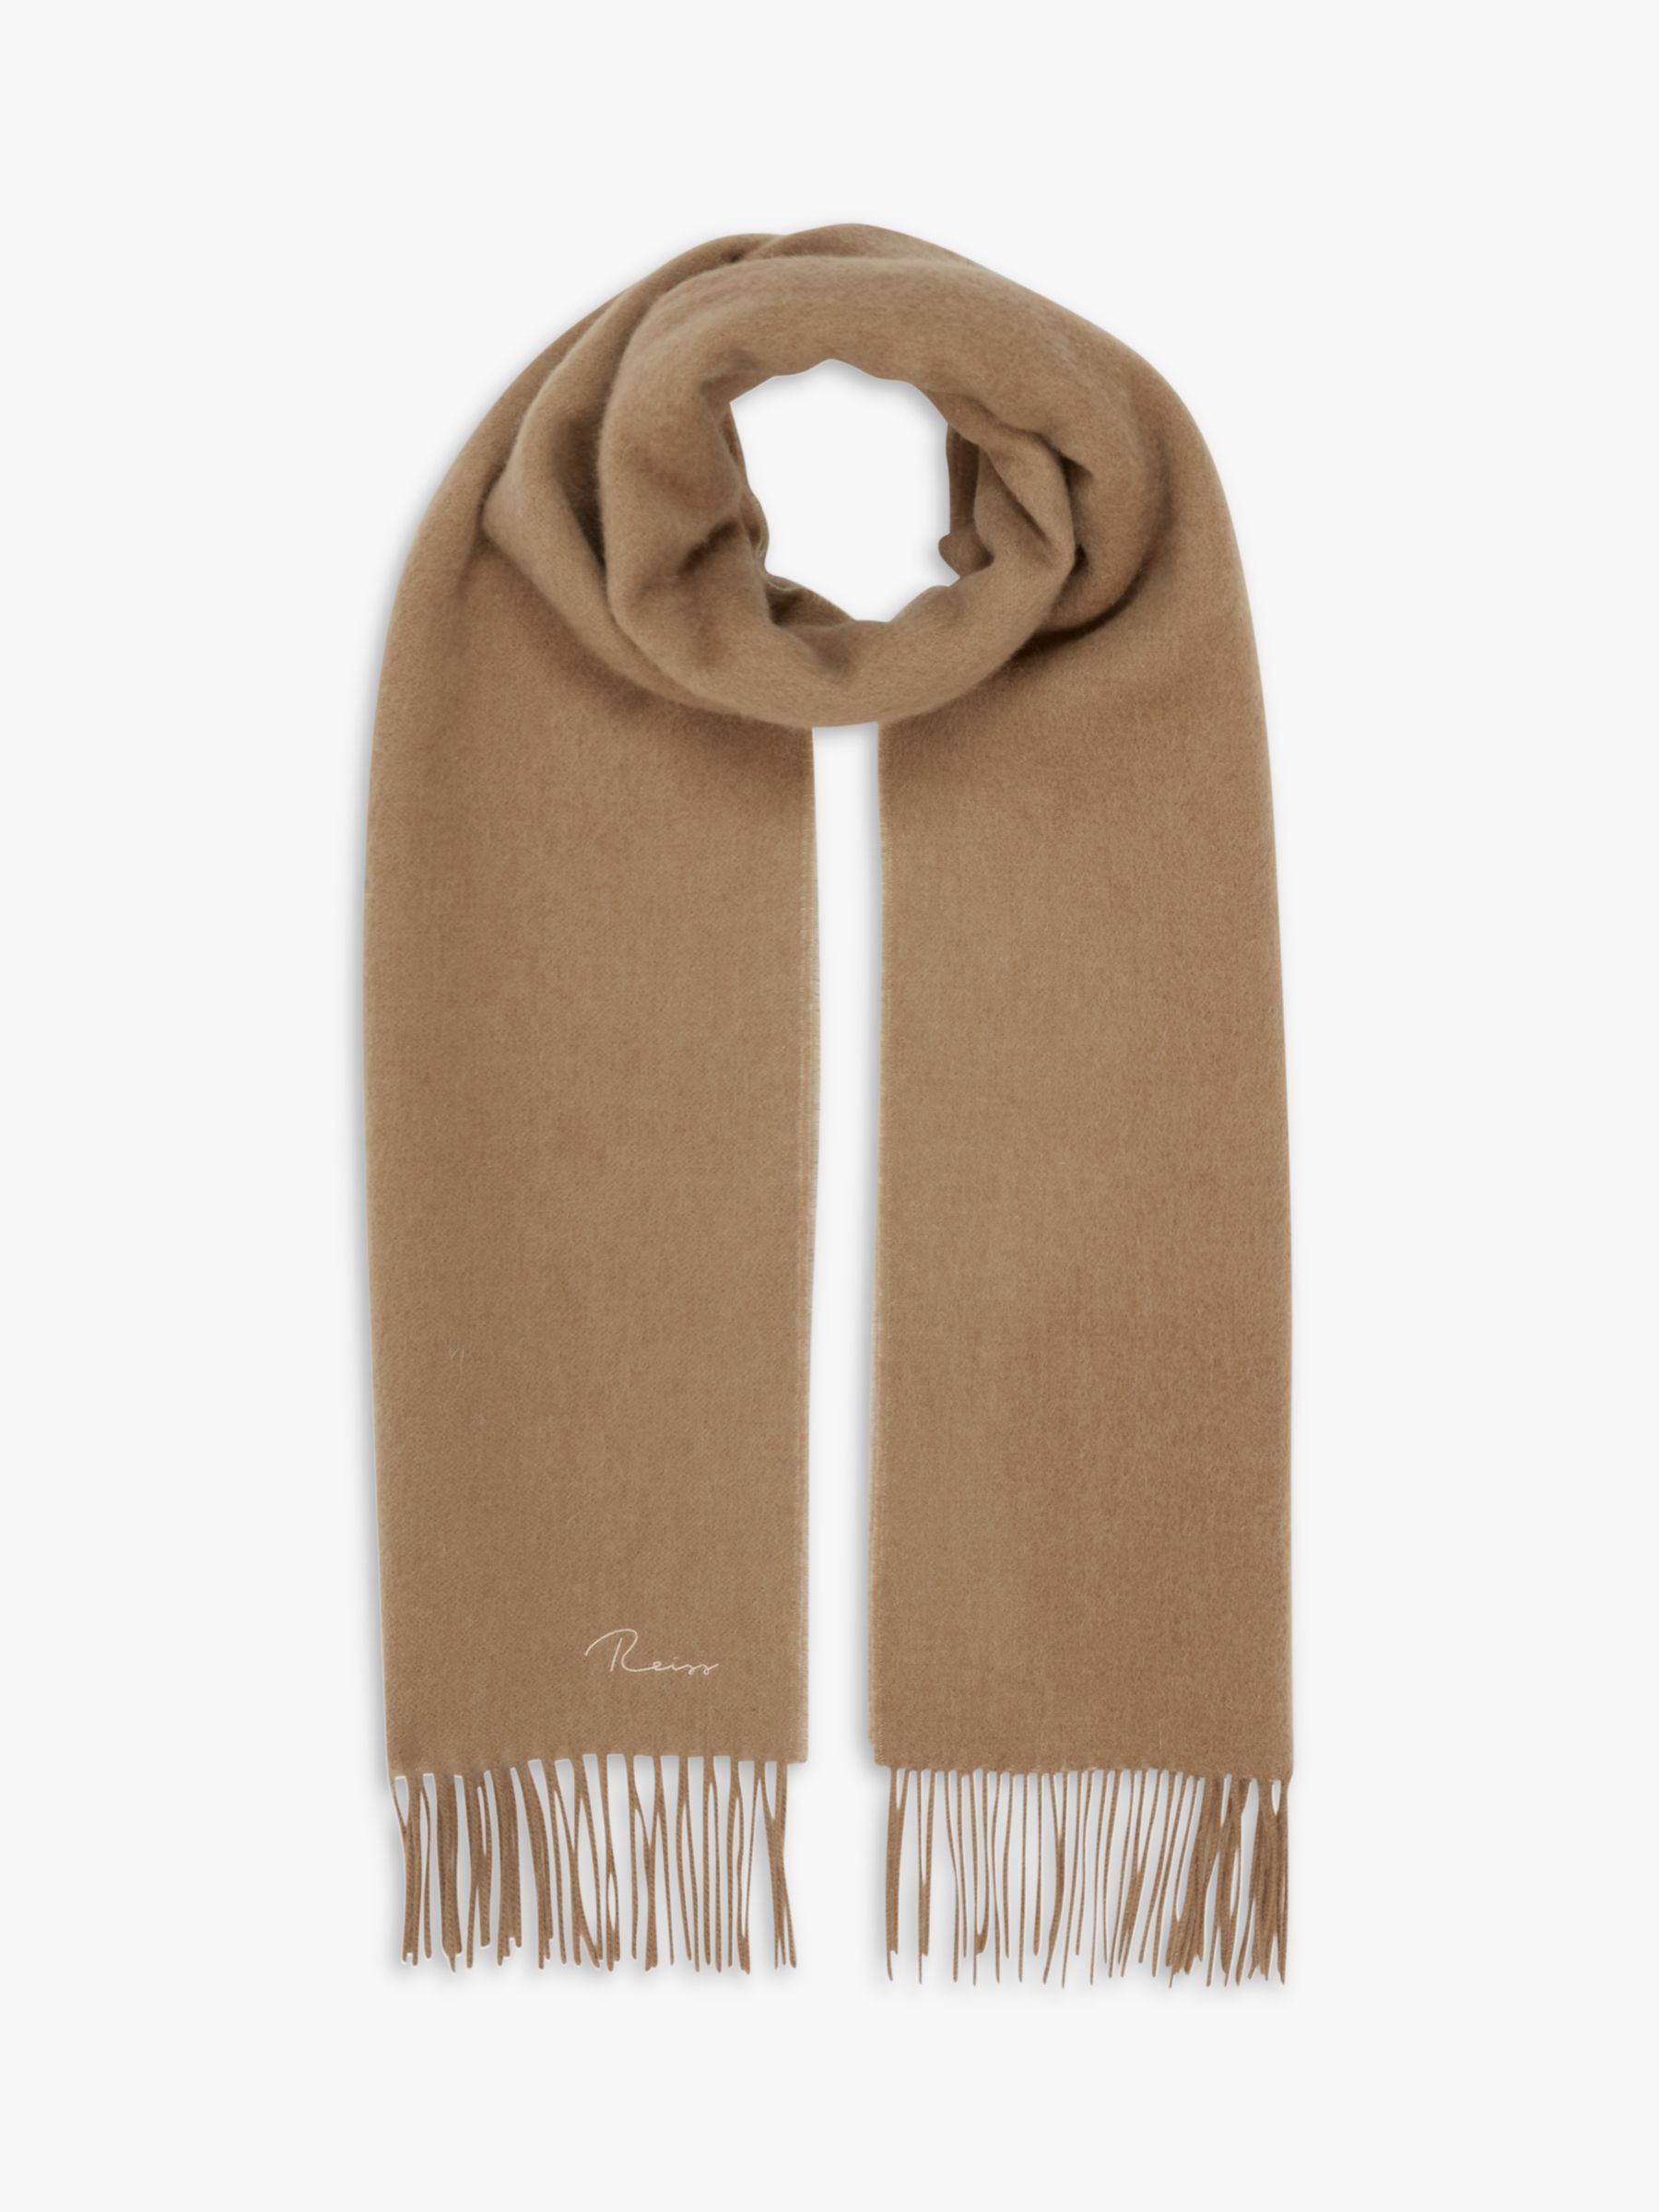 Reiss Picton Cashmere Blend Scarf, Camel, One Size